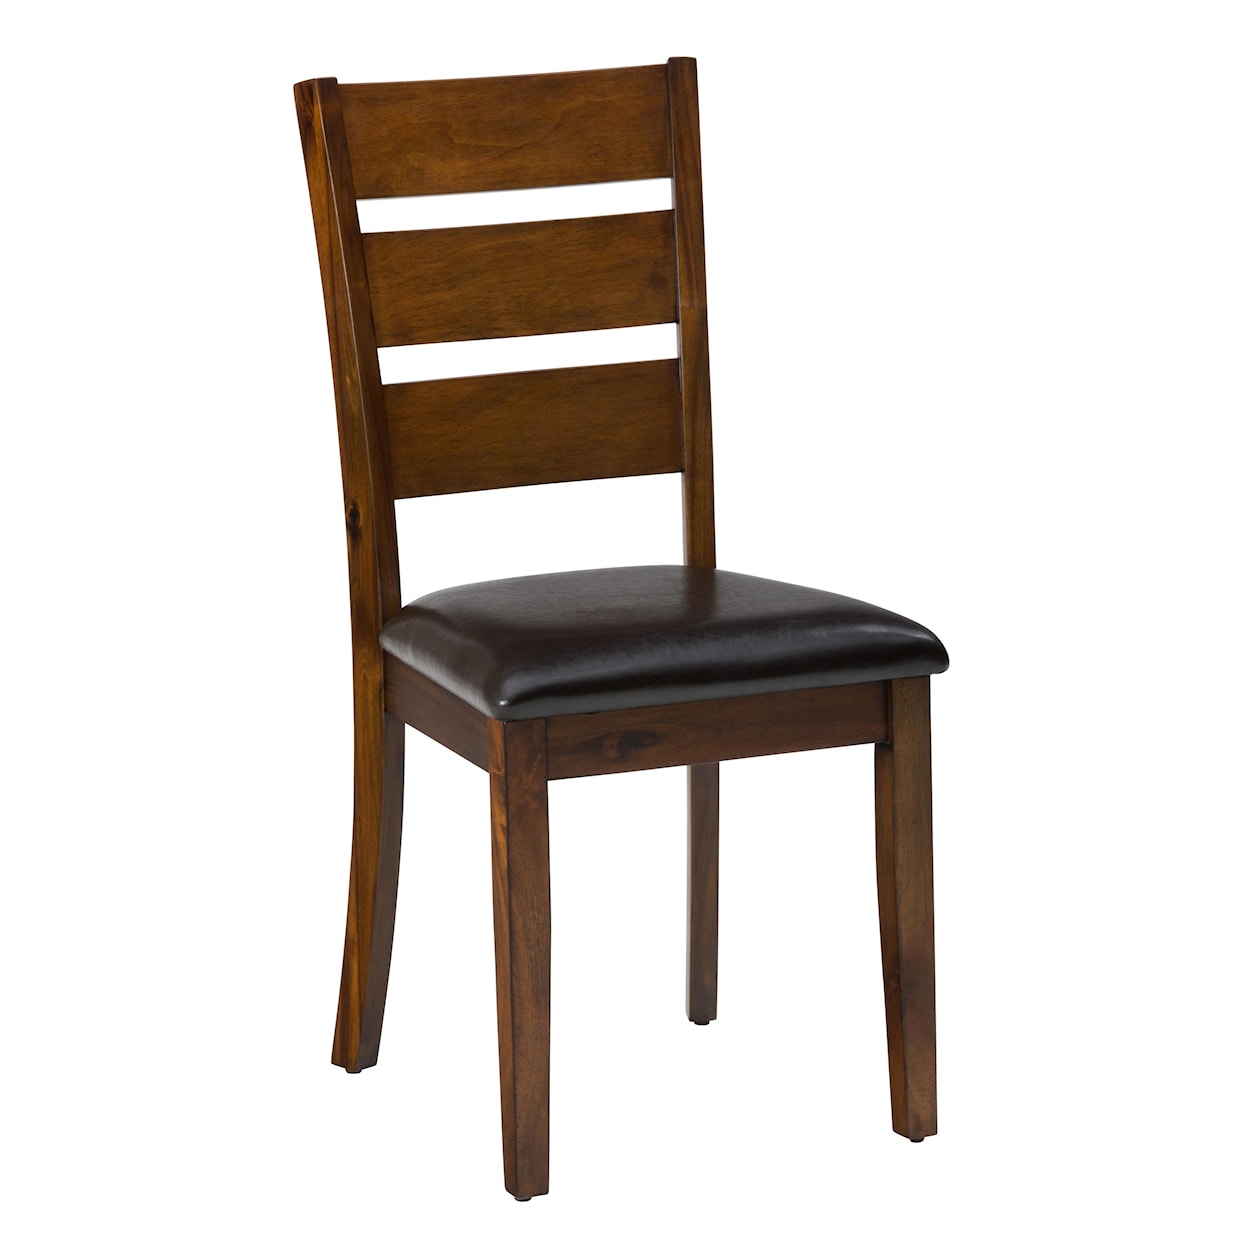 Jofran Plantation 5 Pack- Table with 4 Chairs